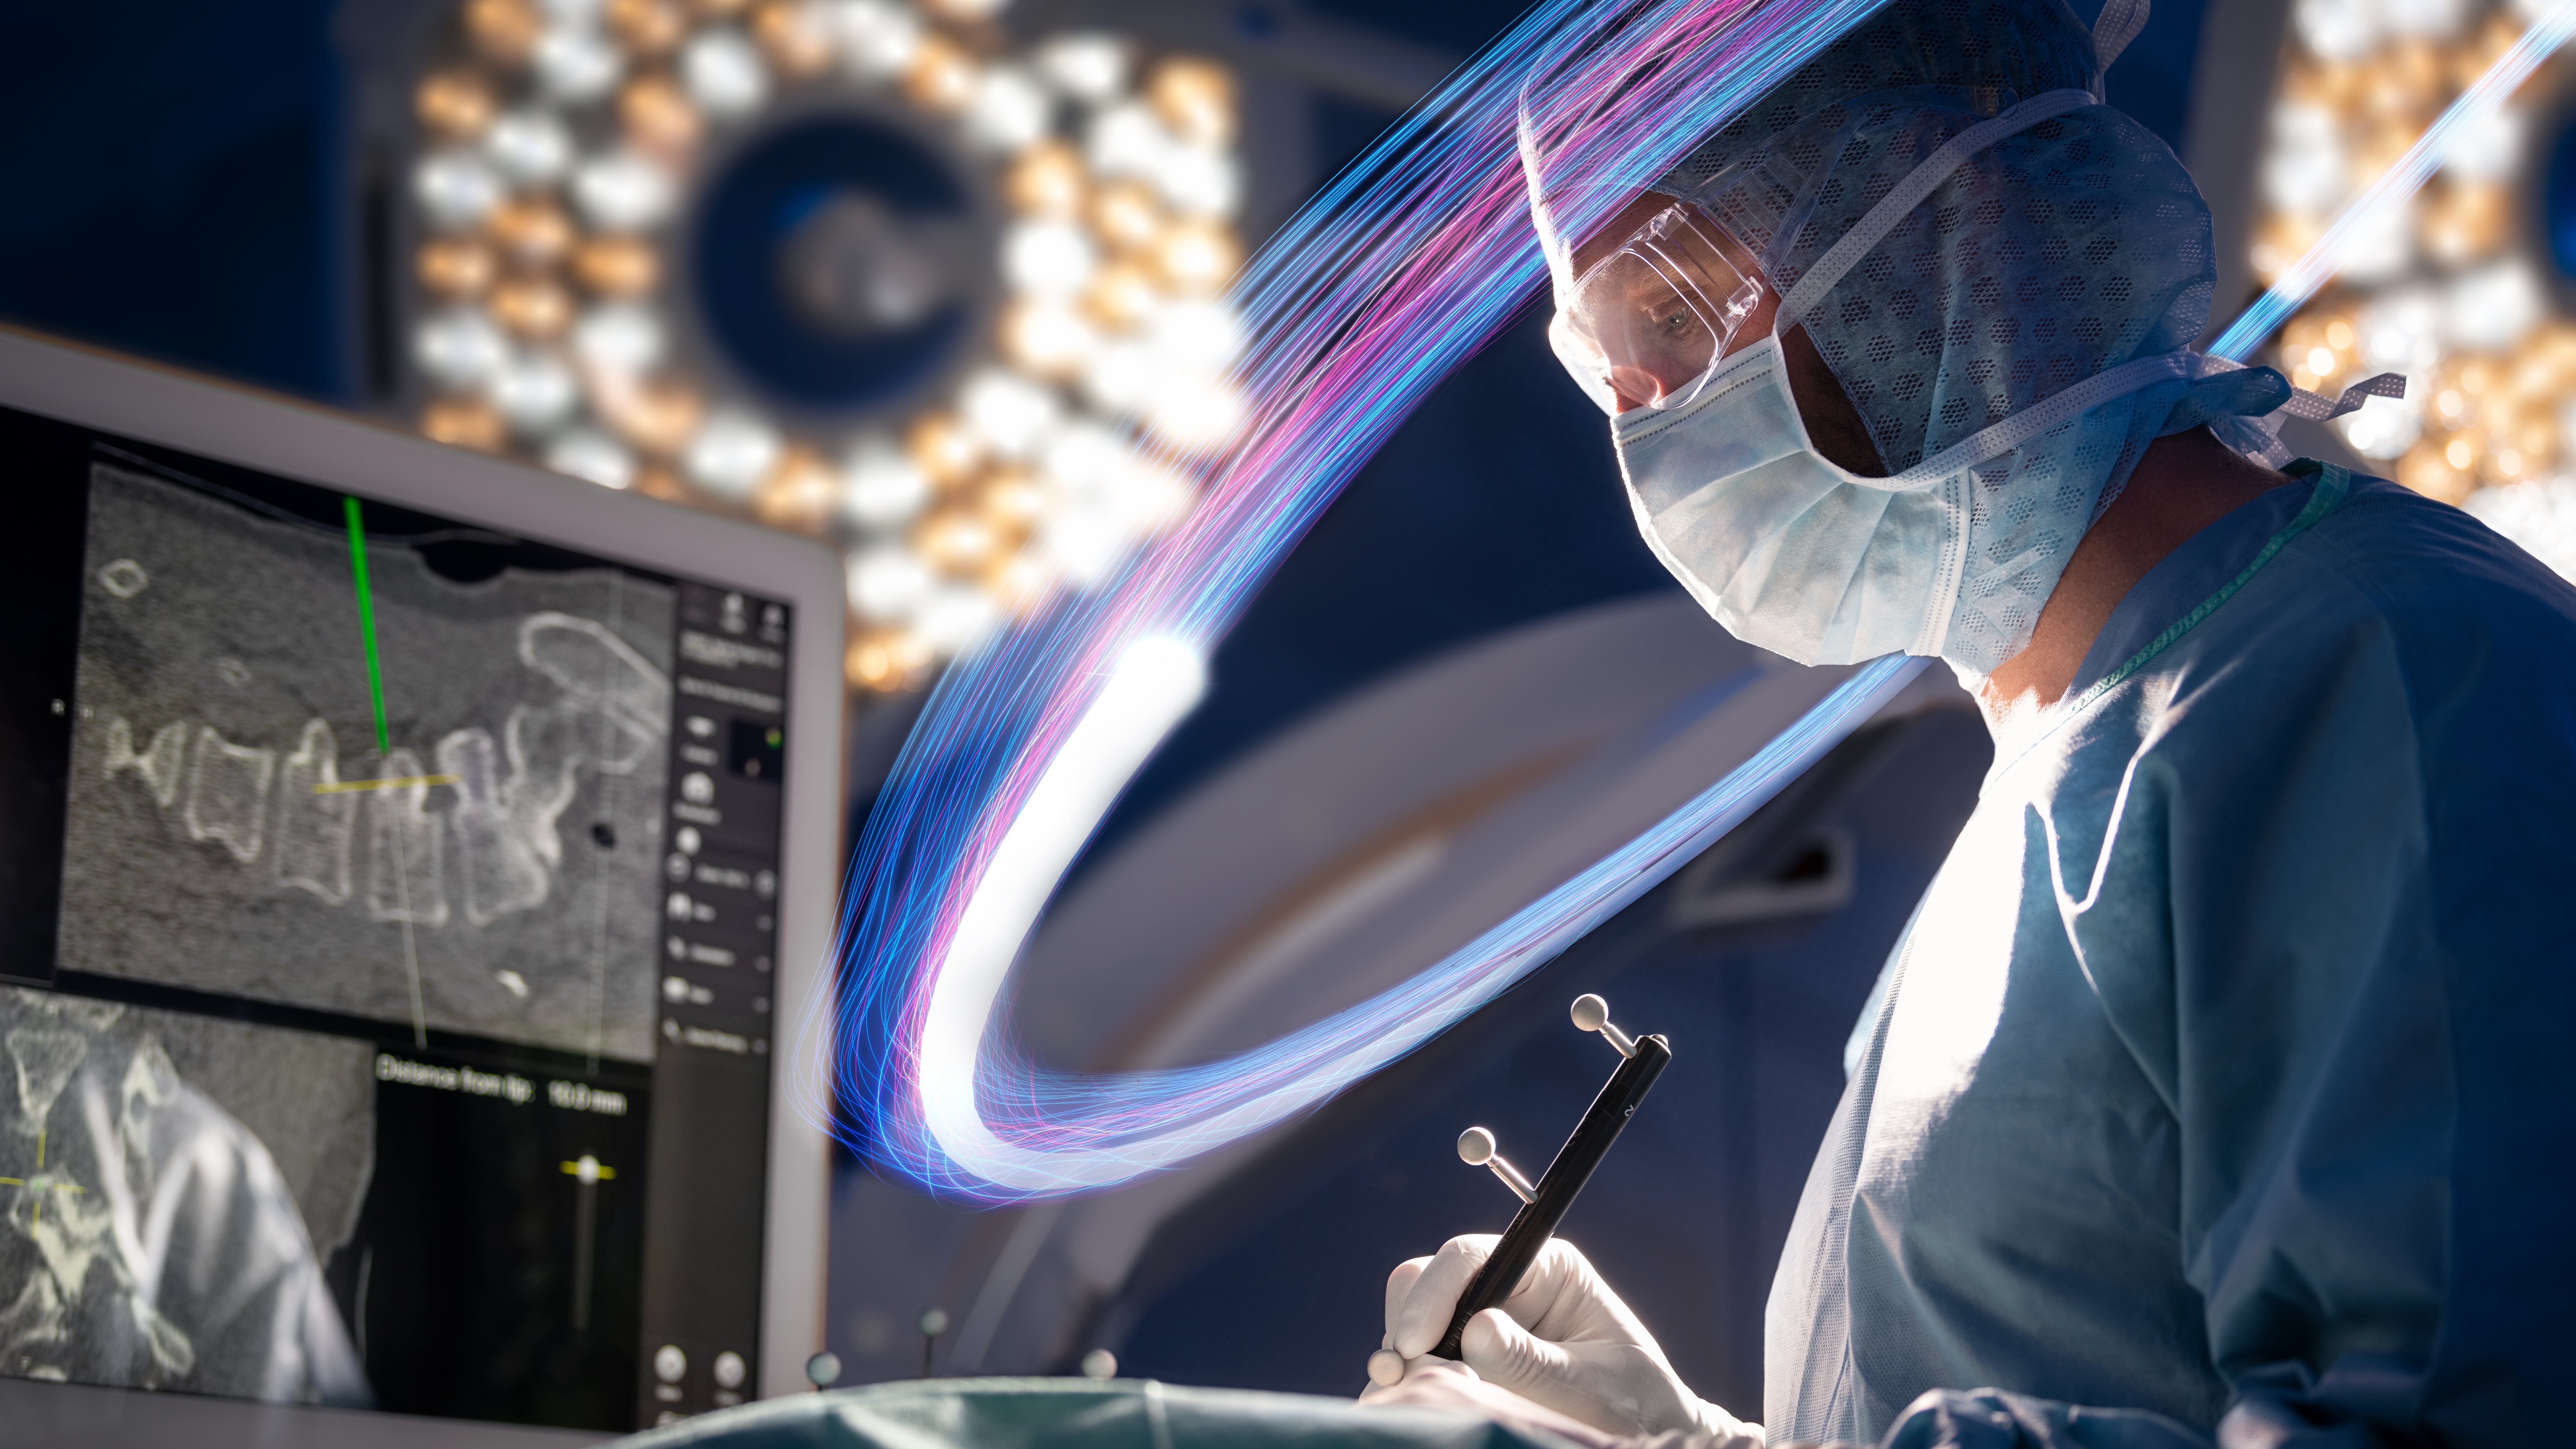 Brainlab technology in use during surgery with enhanced blue and lilac visual effects